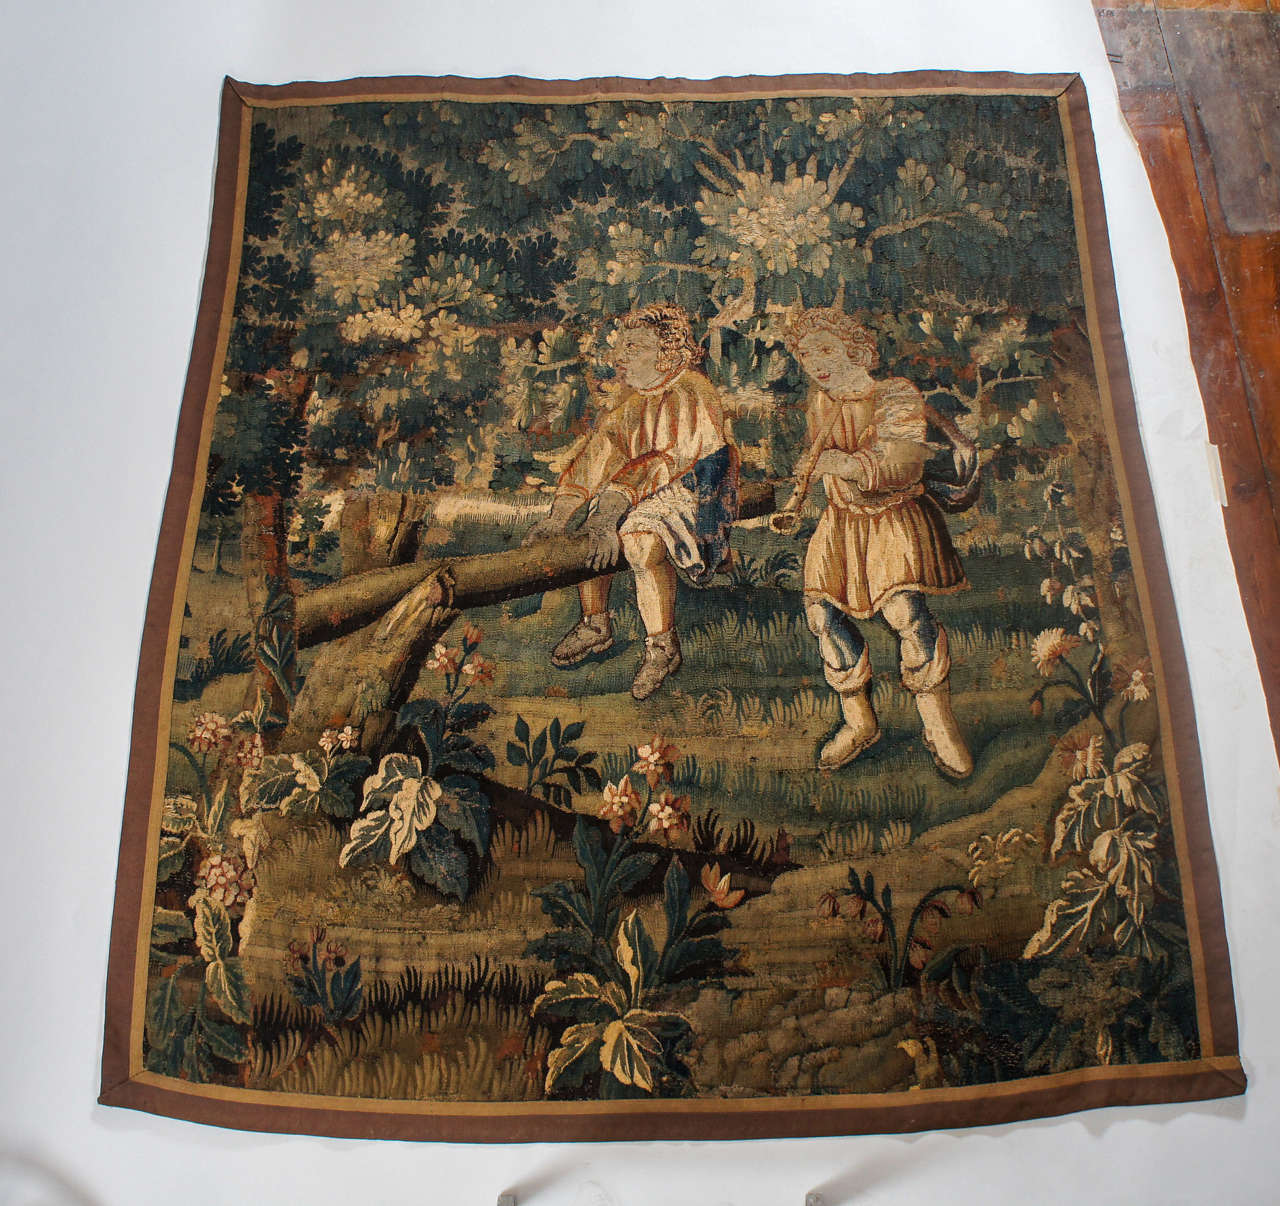 Wonderful first half 17th century Flemish verdure tapestry of two young boys playing in a woodland setting; one sitting astride a fallen tree and the other with musical instrument.  Exquisite coloring; wonderful piece.